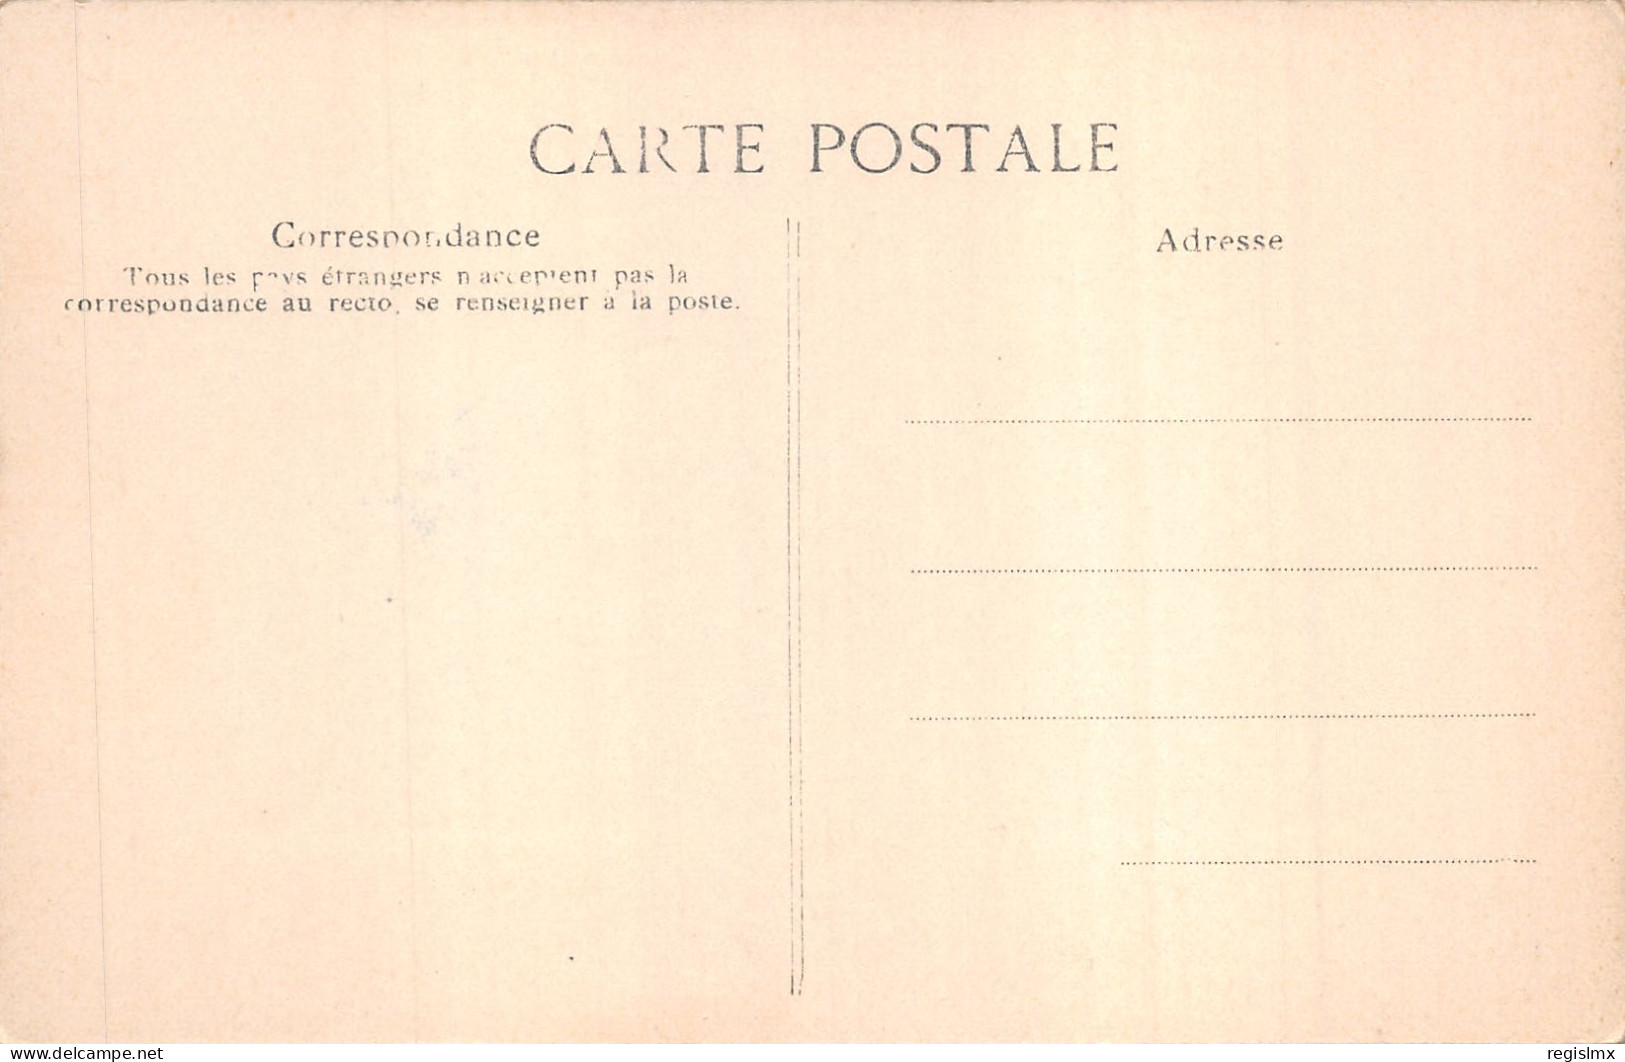 35-FOUGERES-N°T2403-D/0123 - Fougeres